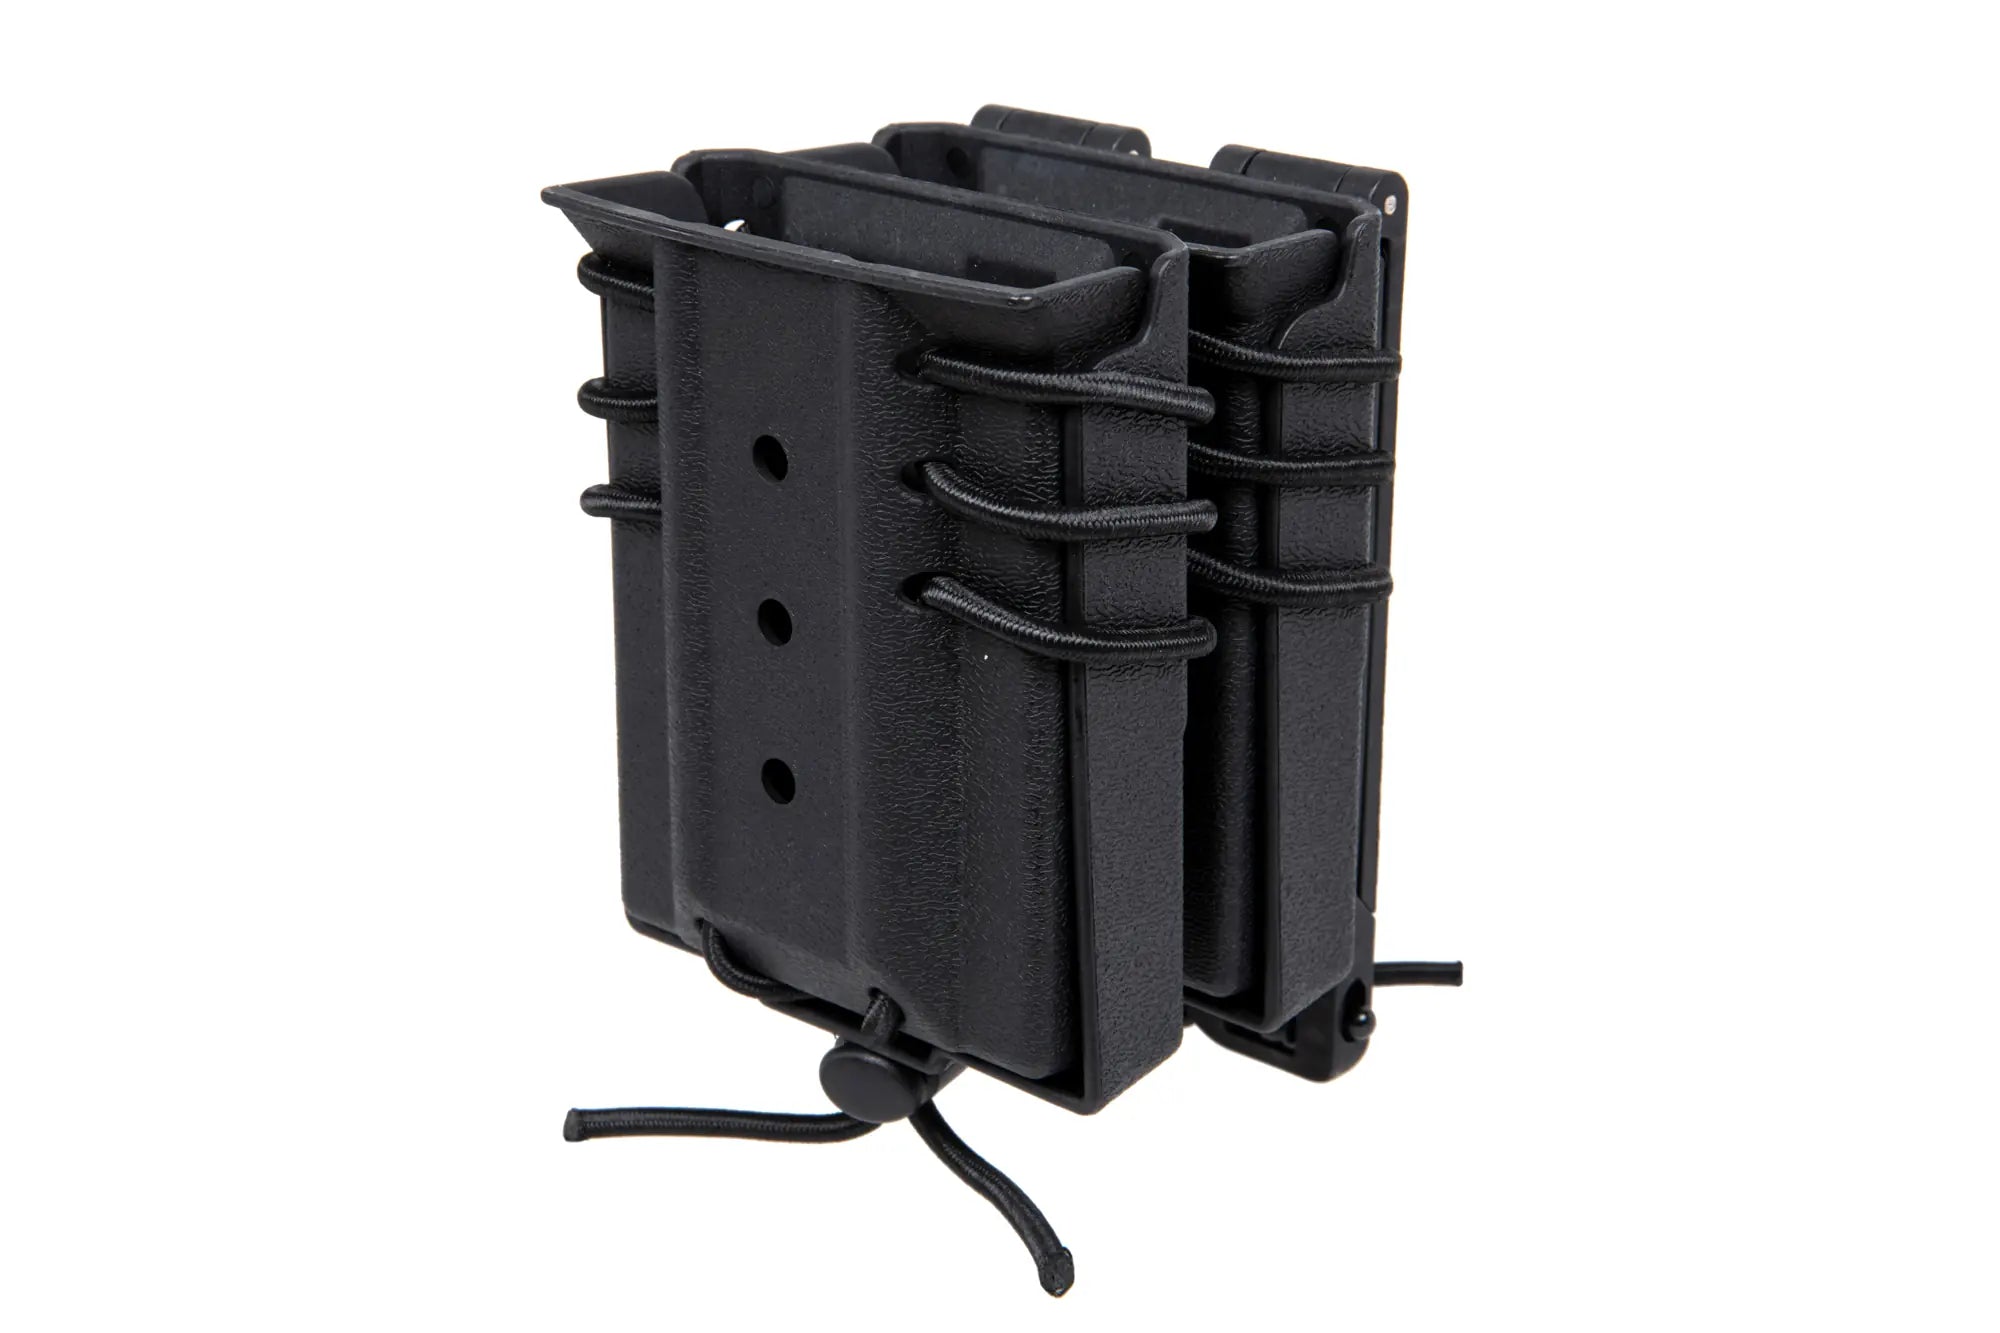 Carrier for 2 M4/M16 magazines Wosport Urban Assault Quick Pull Black-2